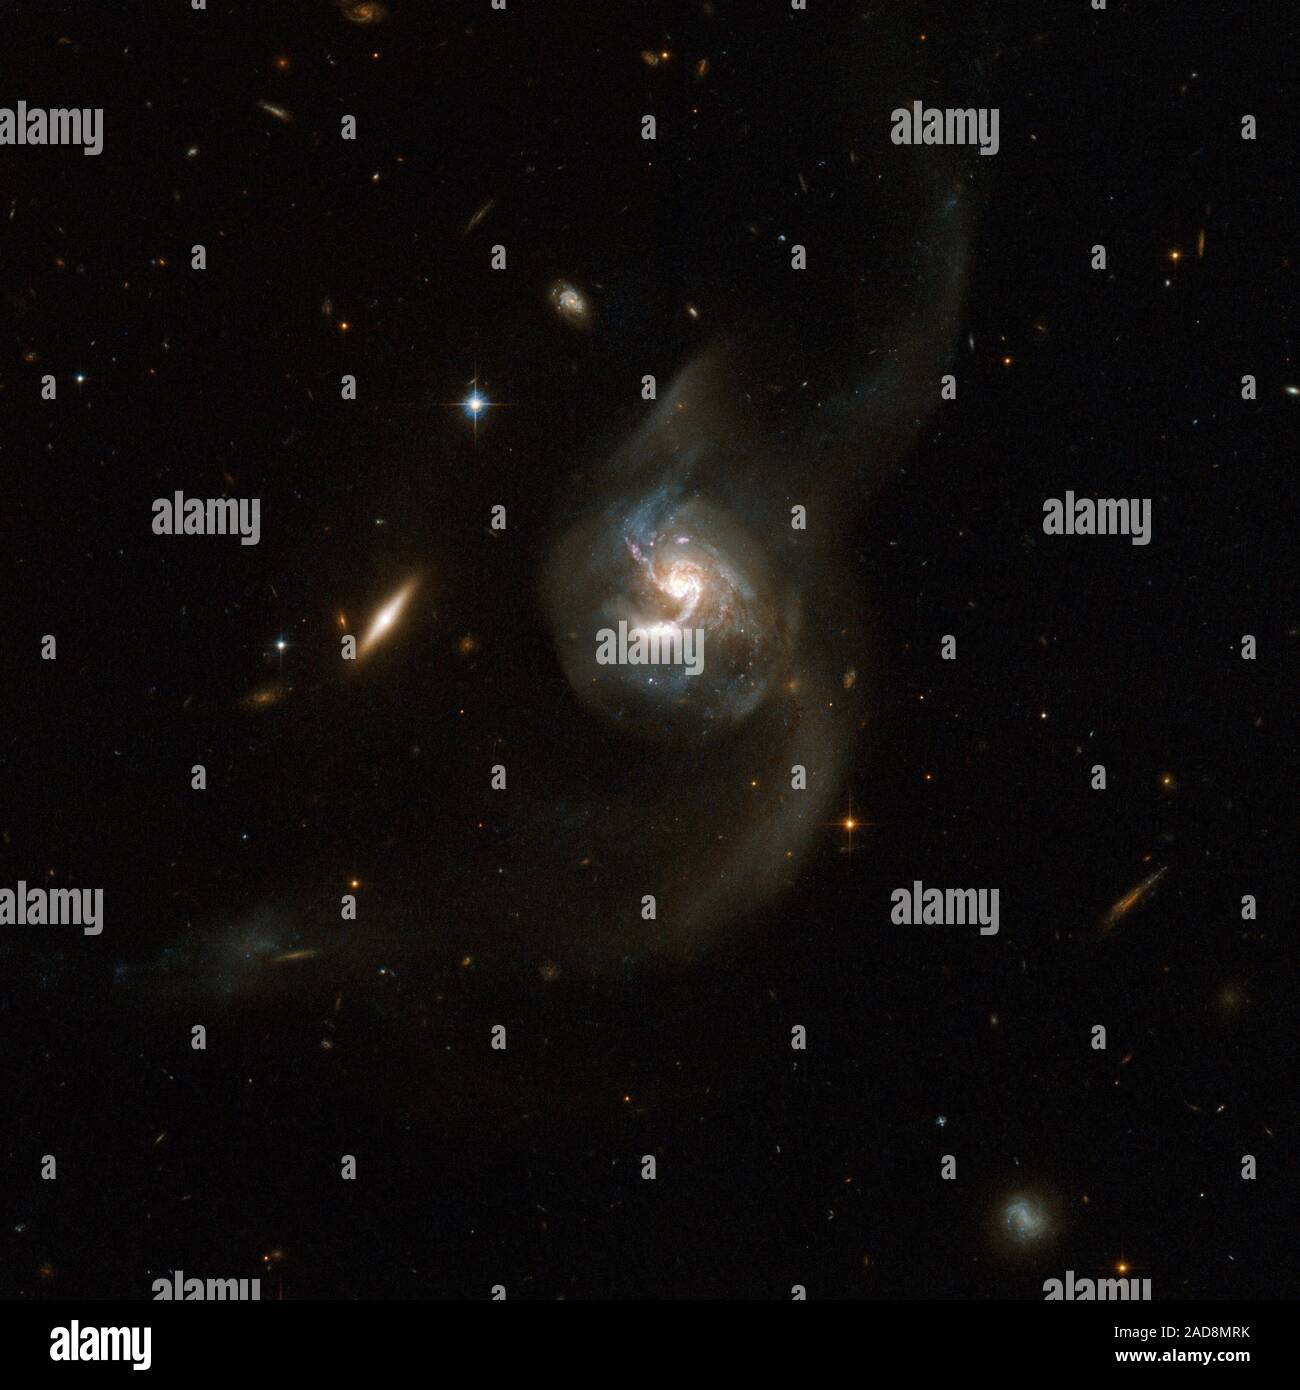 NGC 6090 is a beautiful pair of spiral galaxies with an overlapping central region and two long tidal tails formed from material ripped out of the galaxies by gravitational interaction. The two visible cores are approximately 10,000 light-years apart, suggesting that the two galaxies are at an intermediate stage in the merging process. The Hubble image reveals bright knots of newborn stars in the region where the two galaxies overlap. The right hand component has a clear spiral structure if viewed face-on, while the other is seen edge-on with no spiral arms visible. NGC 6090 is located in the Stock Photo